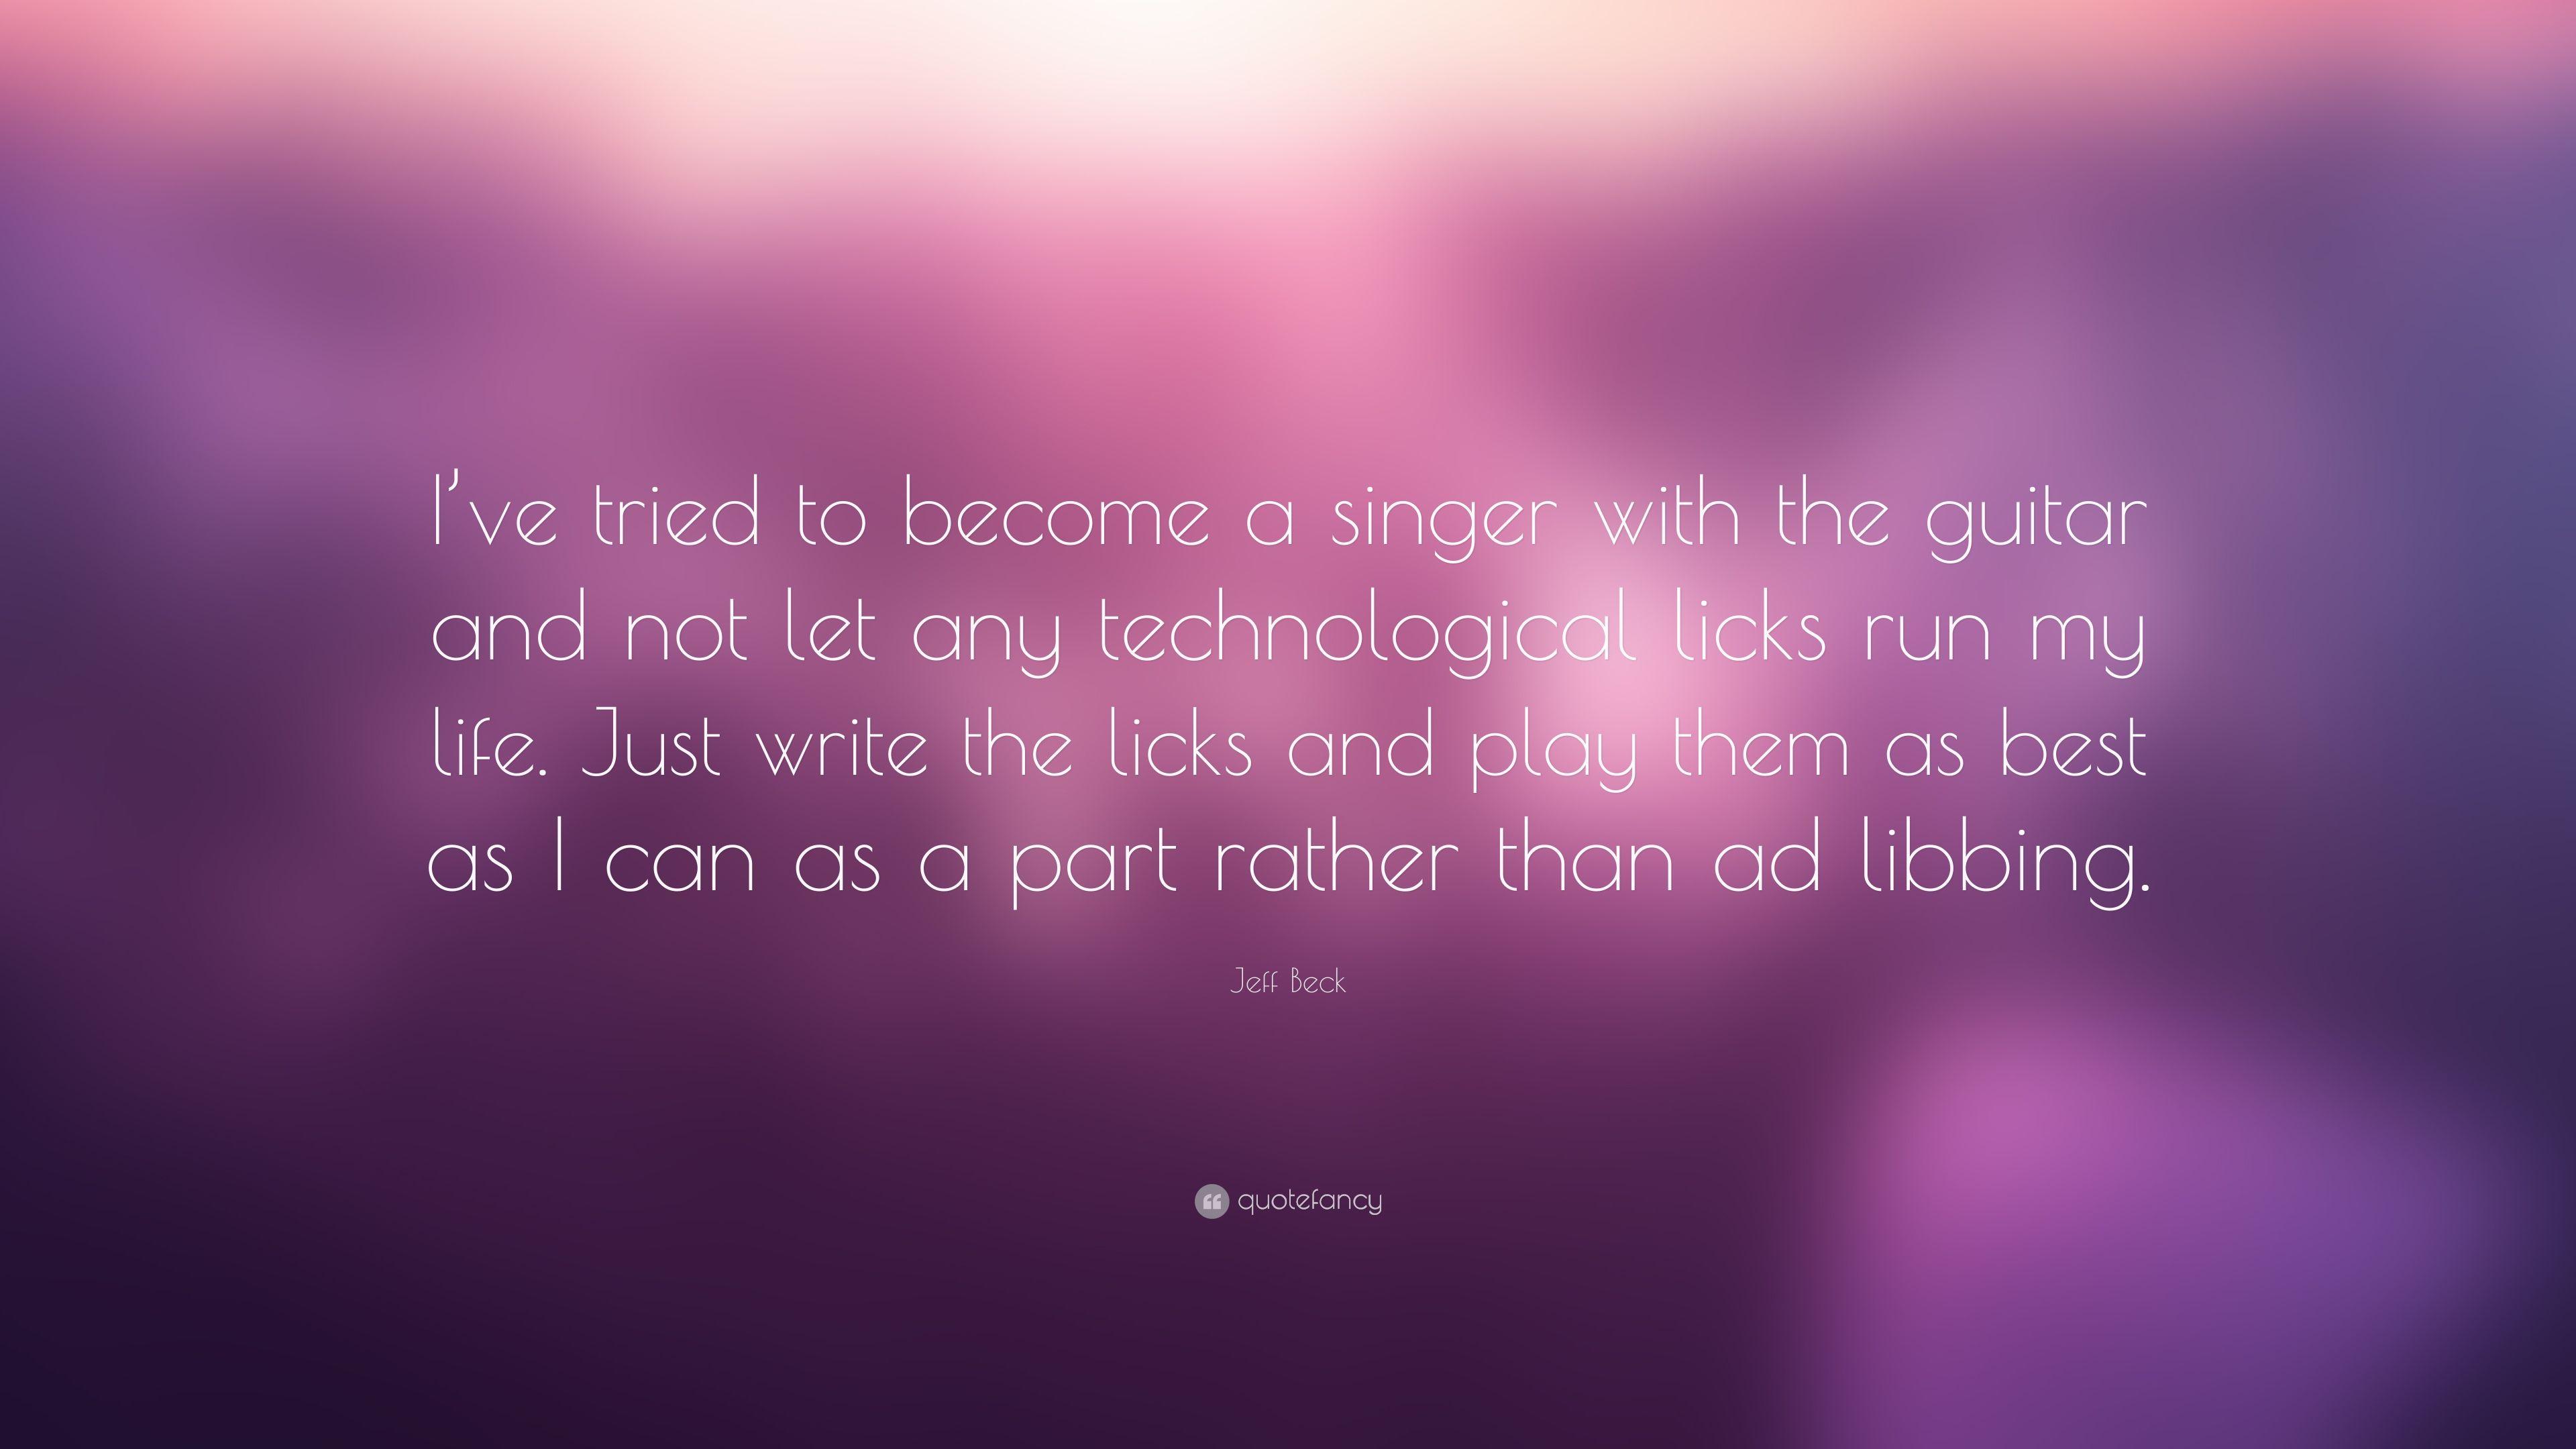 Jeff Beck Quote: “I've tried to become a singer with the guitar